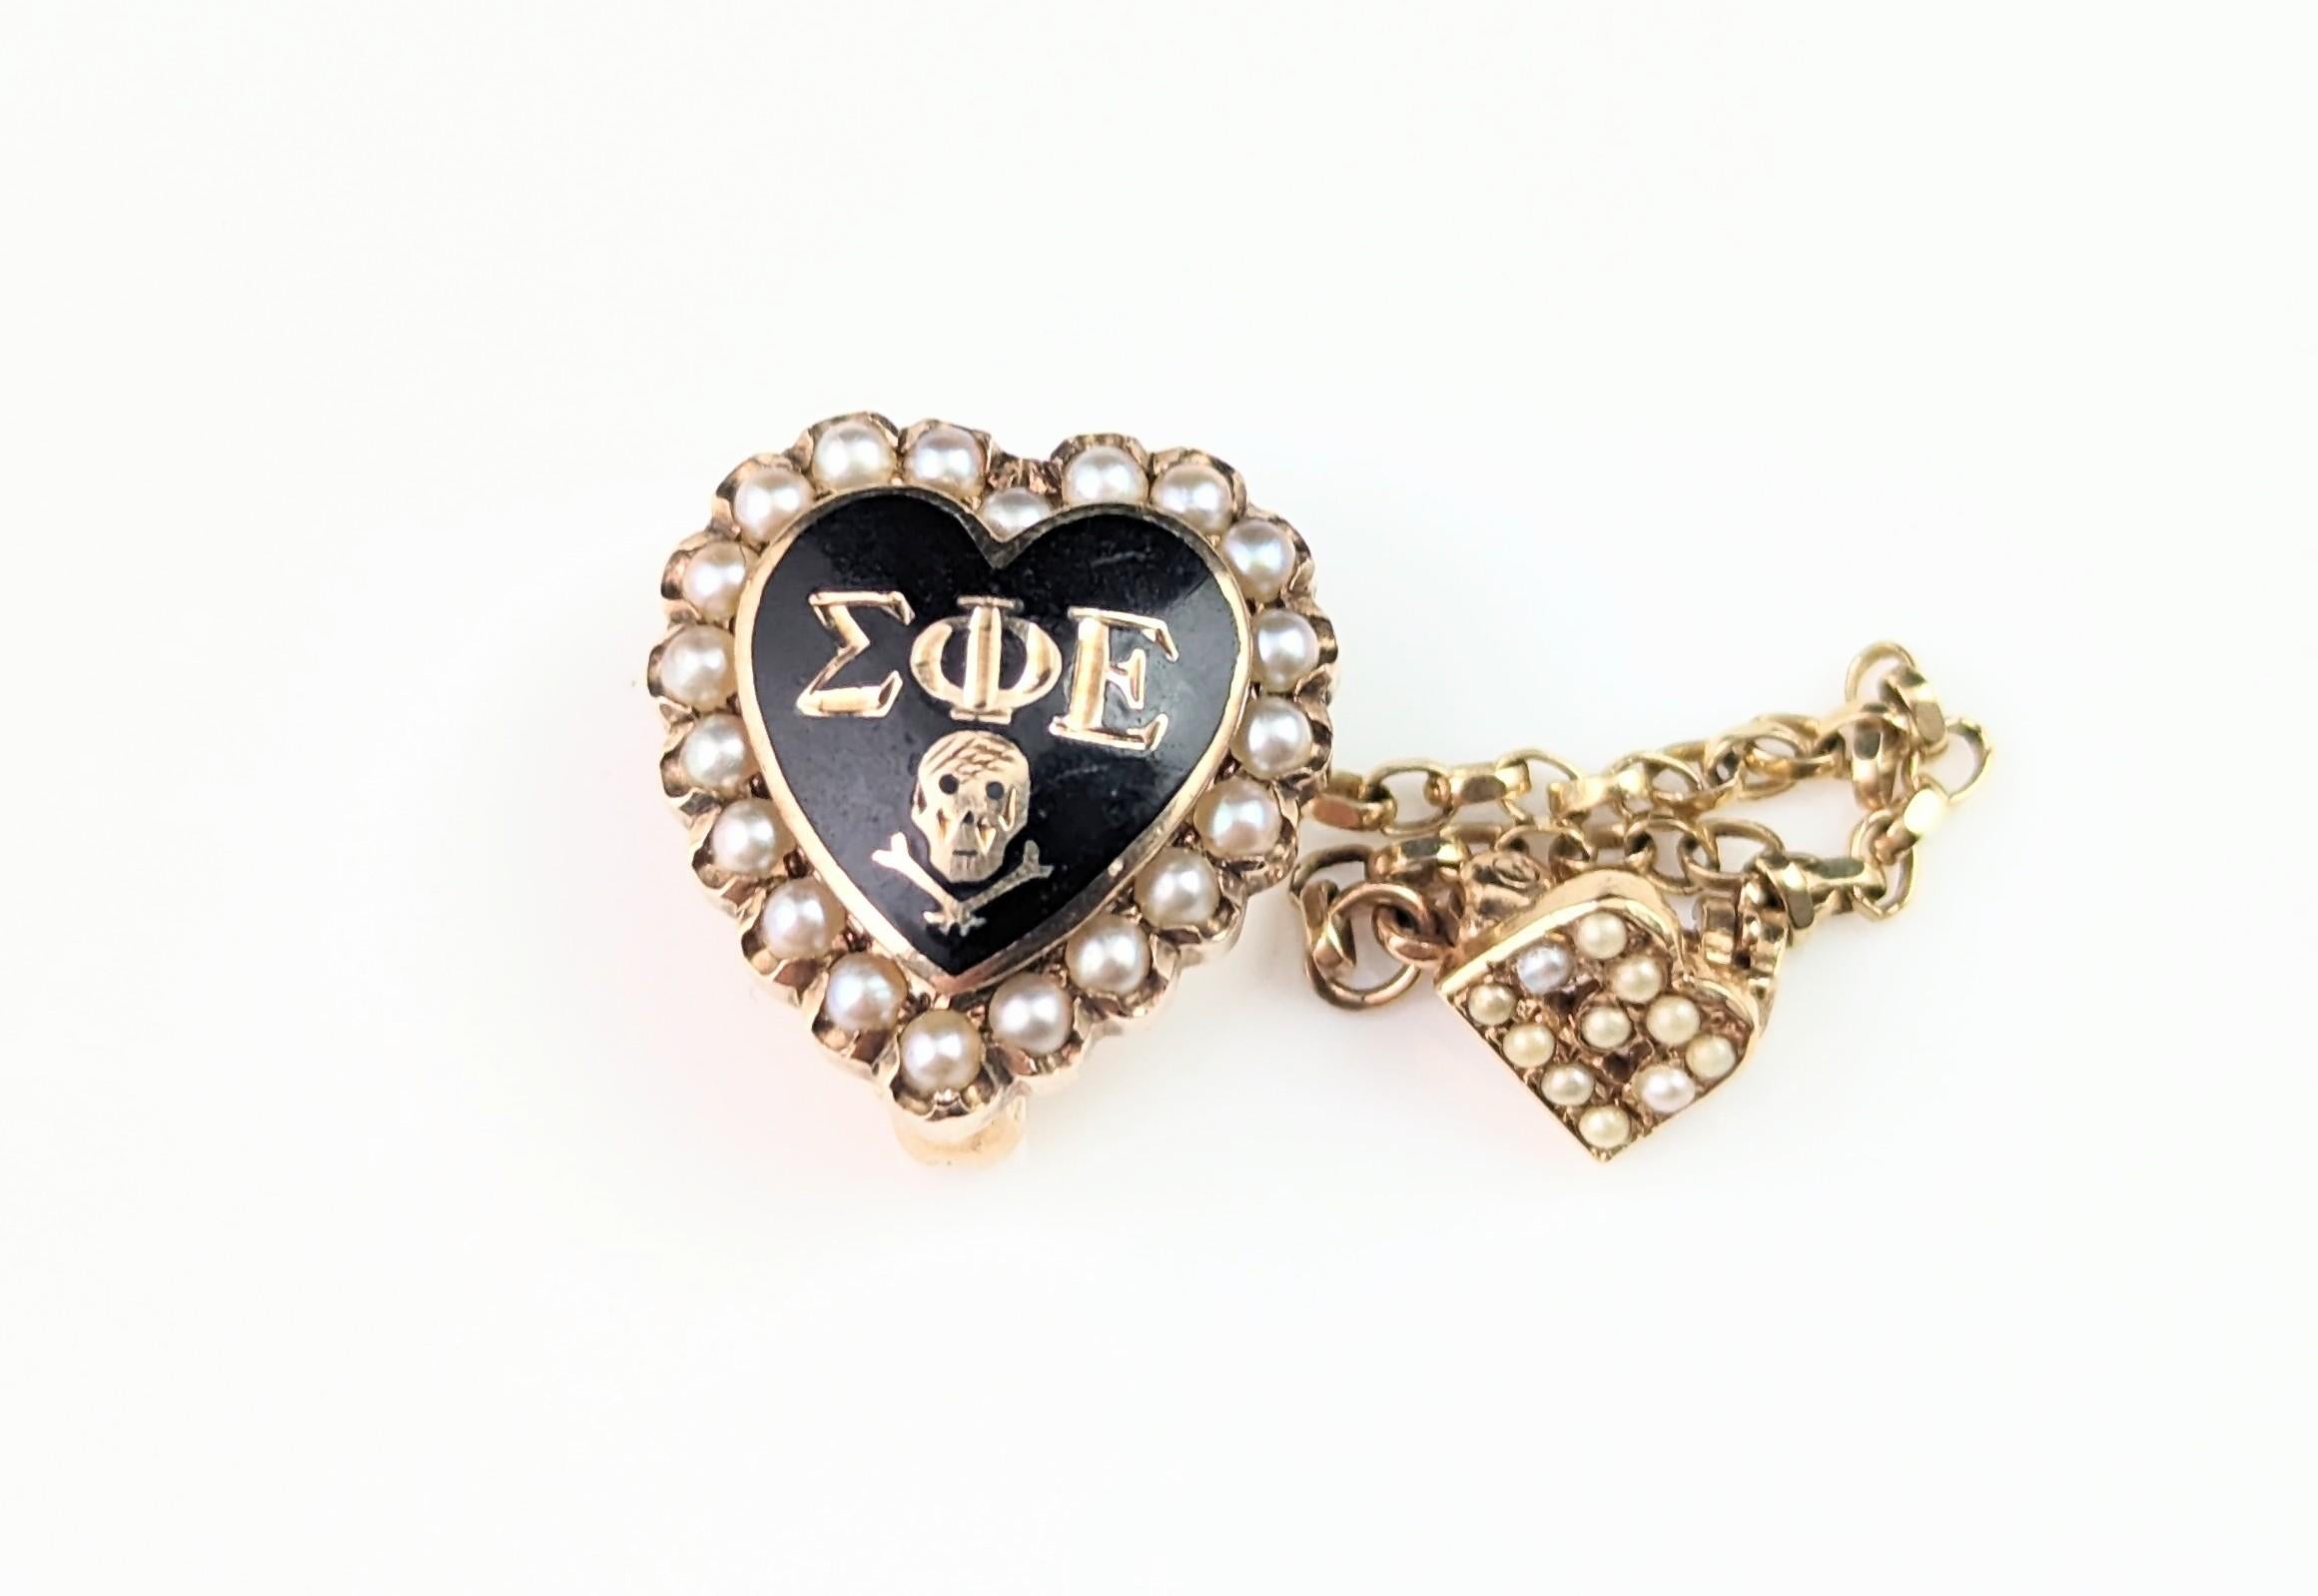 Vintage Fraternity brooch, Heart, Skull and Crossbones, 10k gold and Pearl  5